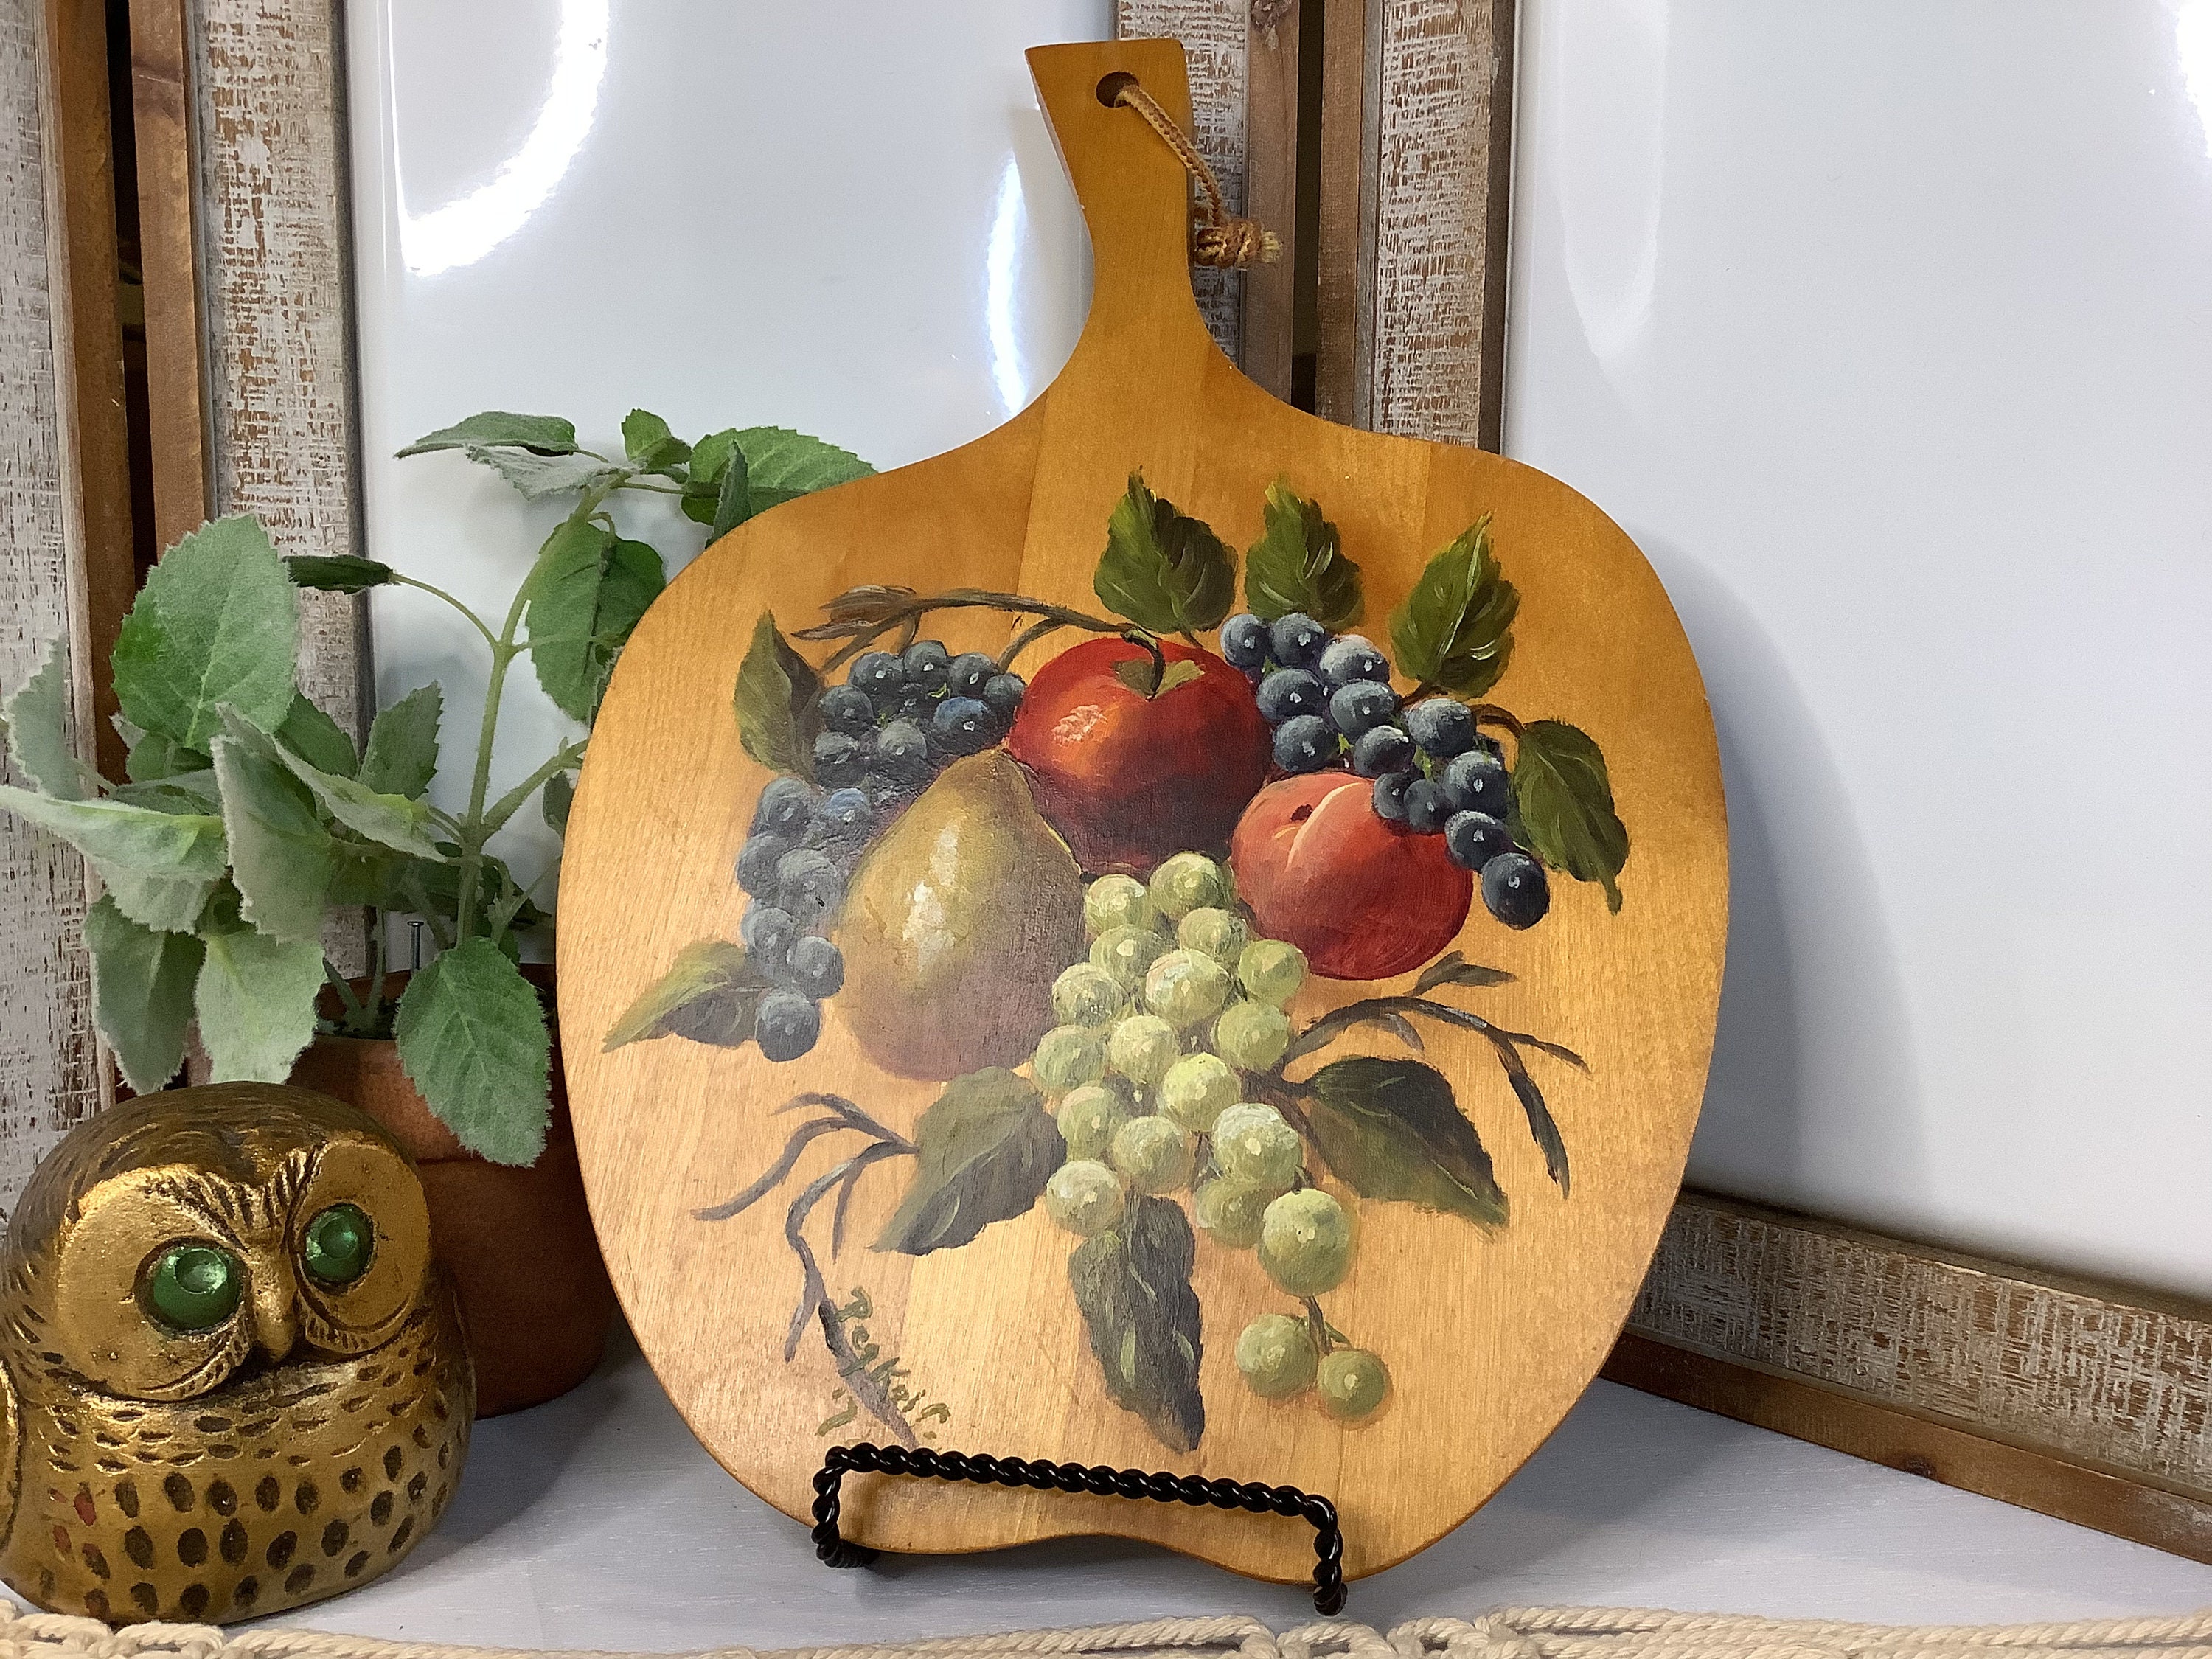 RFW Co. Debuts Abstract Handmade Cutting Boards